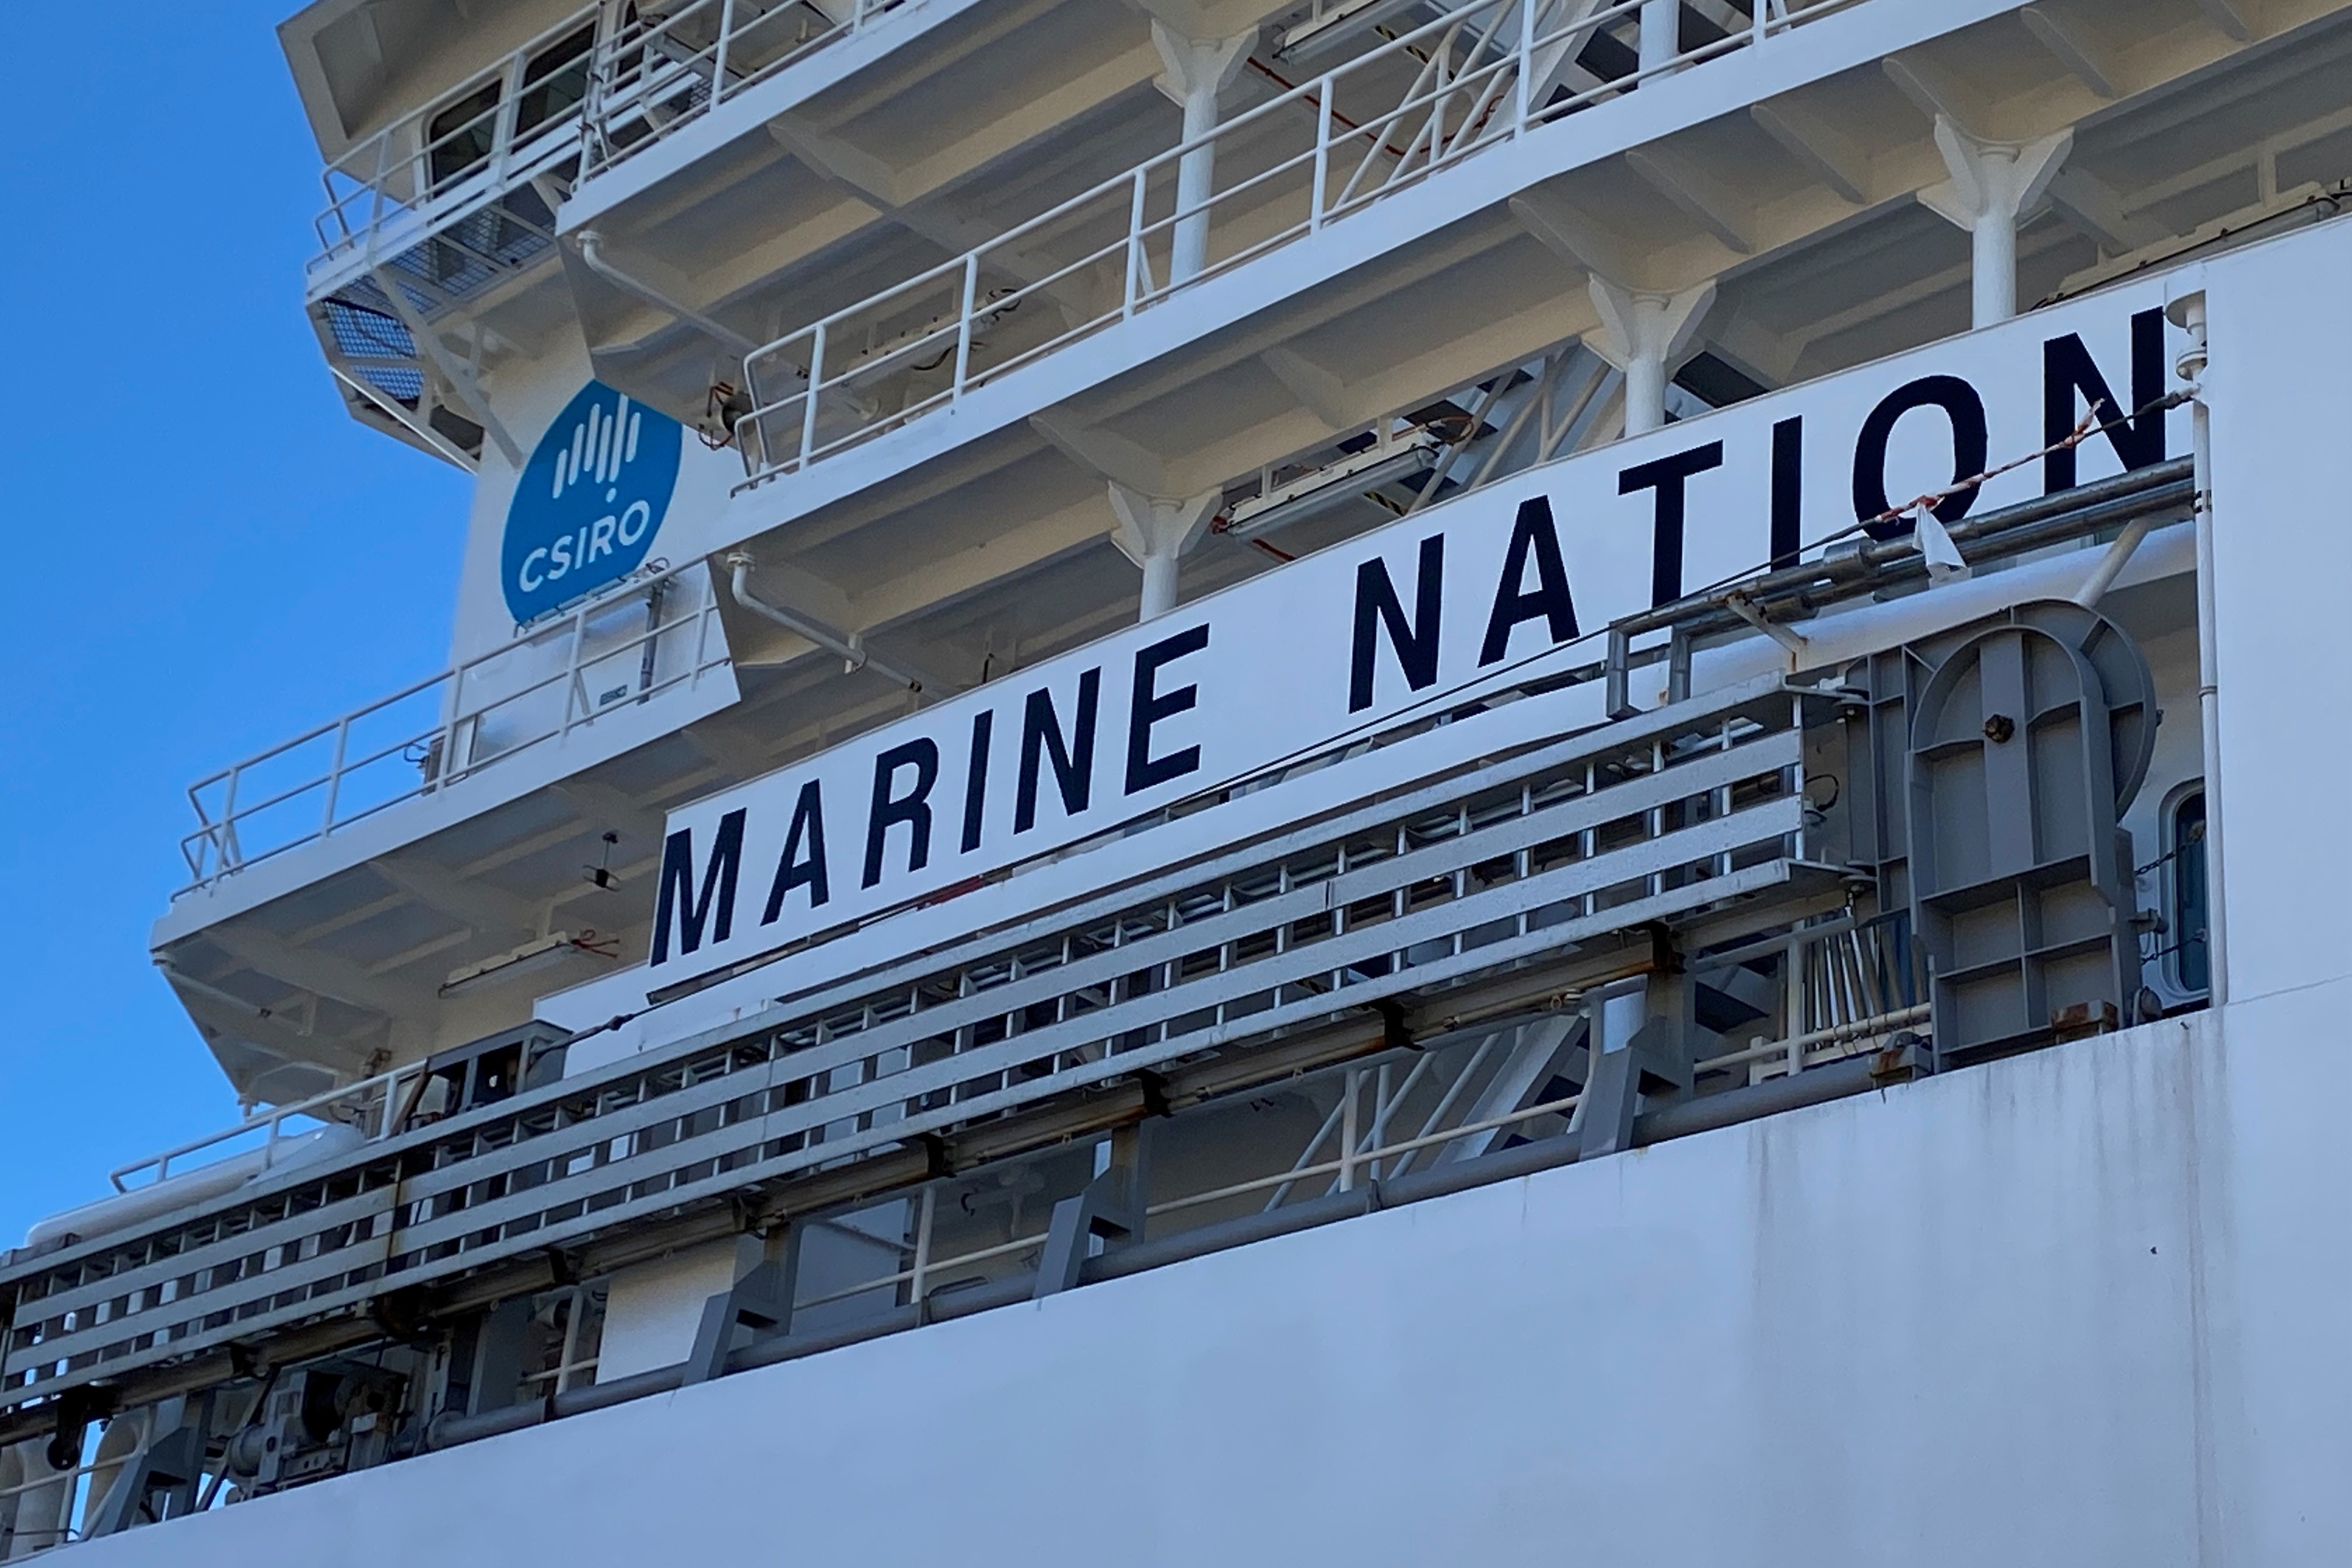 The side of a ship with a blue CSIRO logo on it and the words 'Marine Nation'.